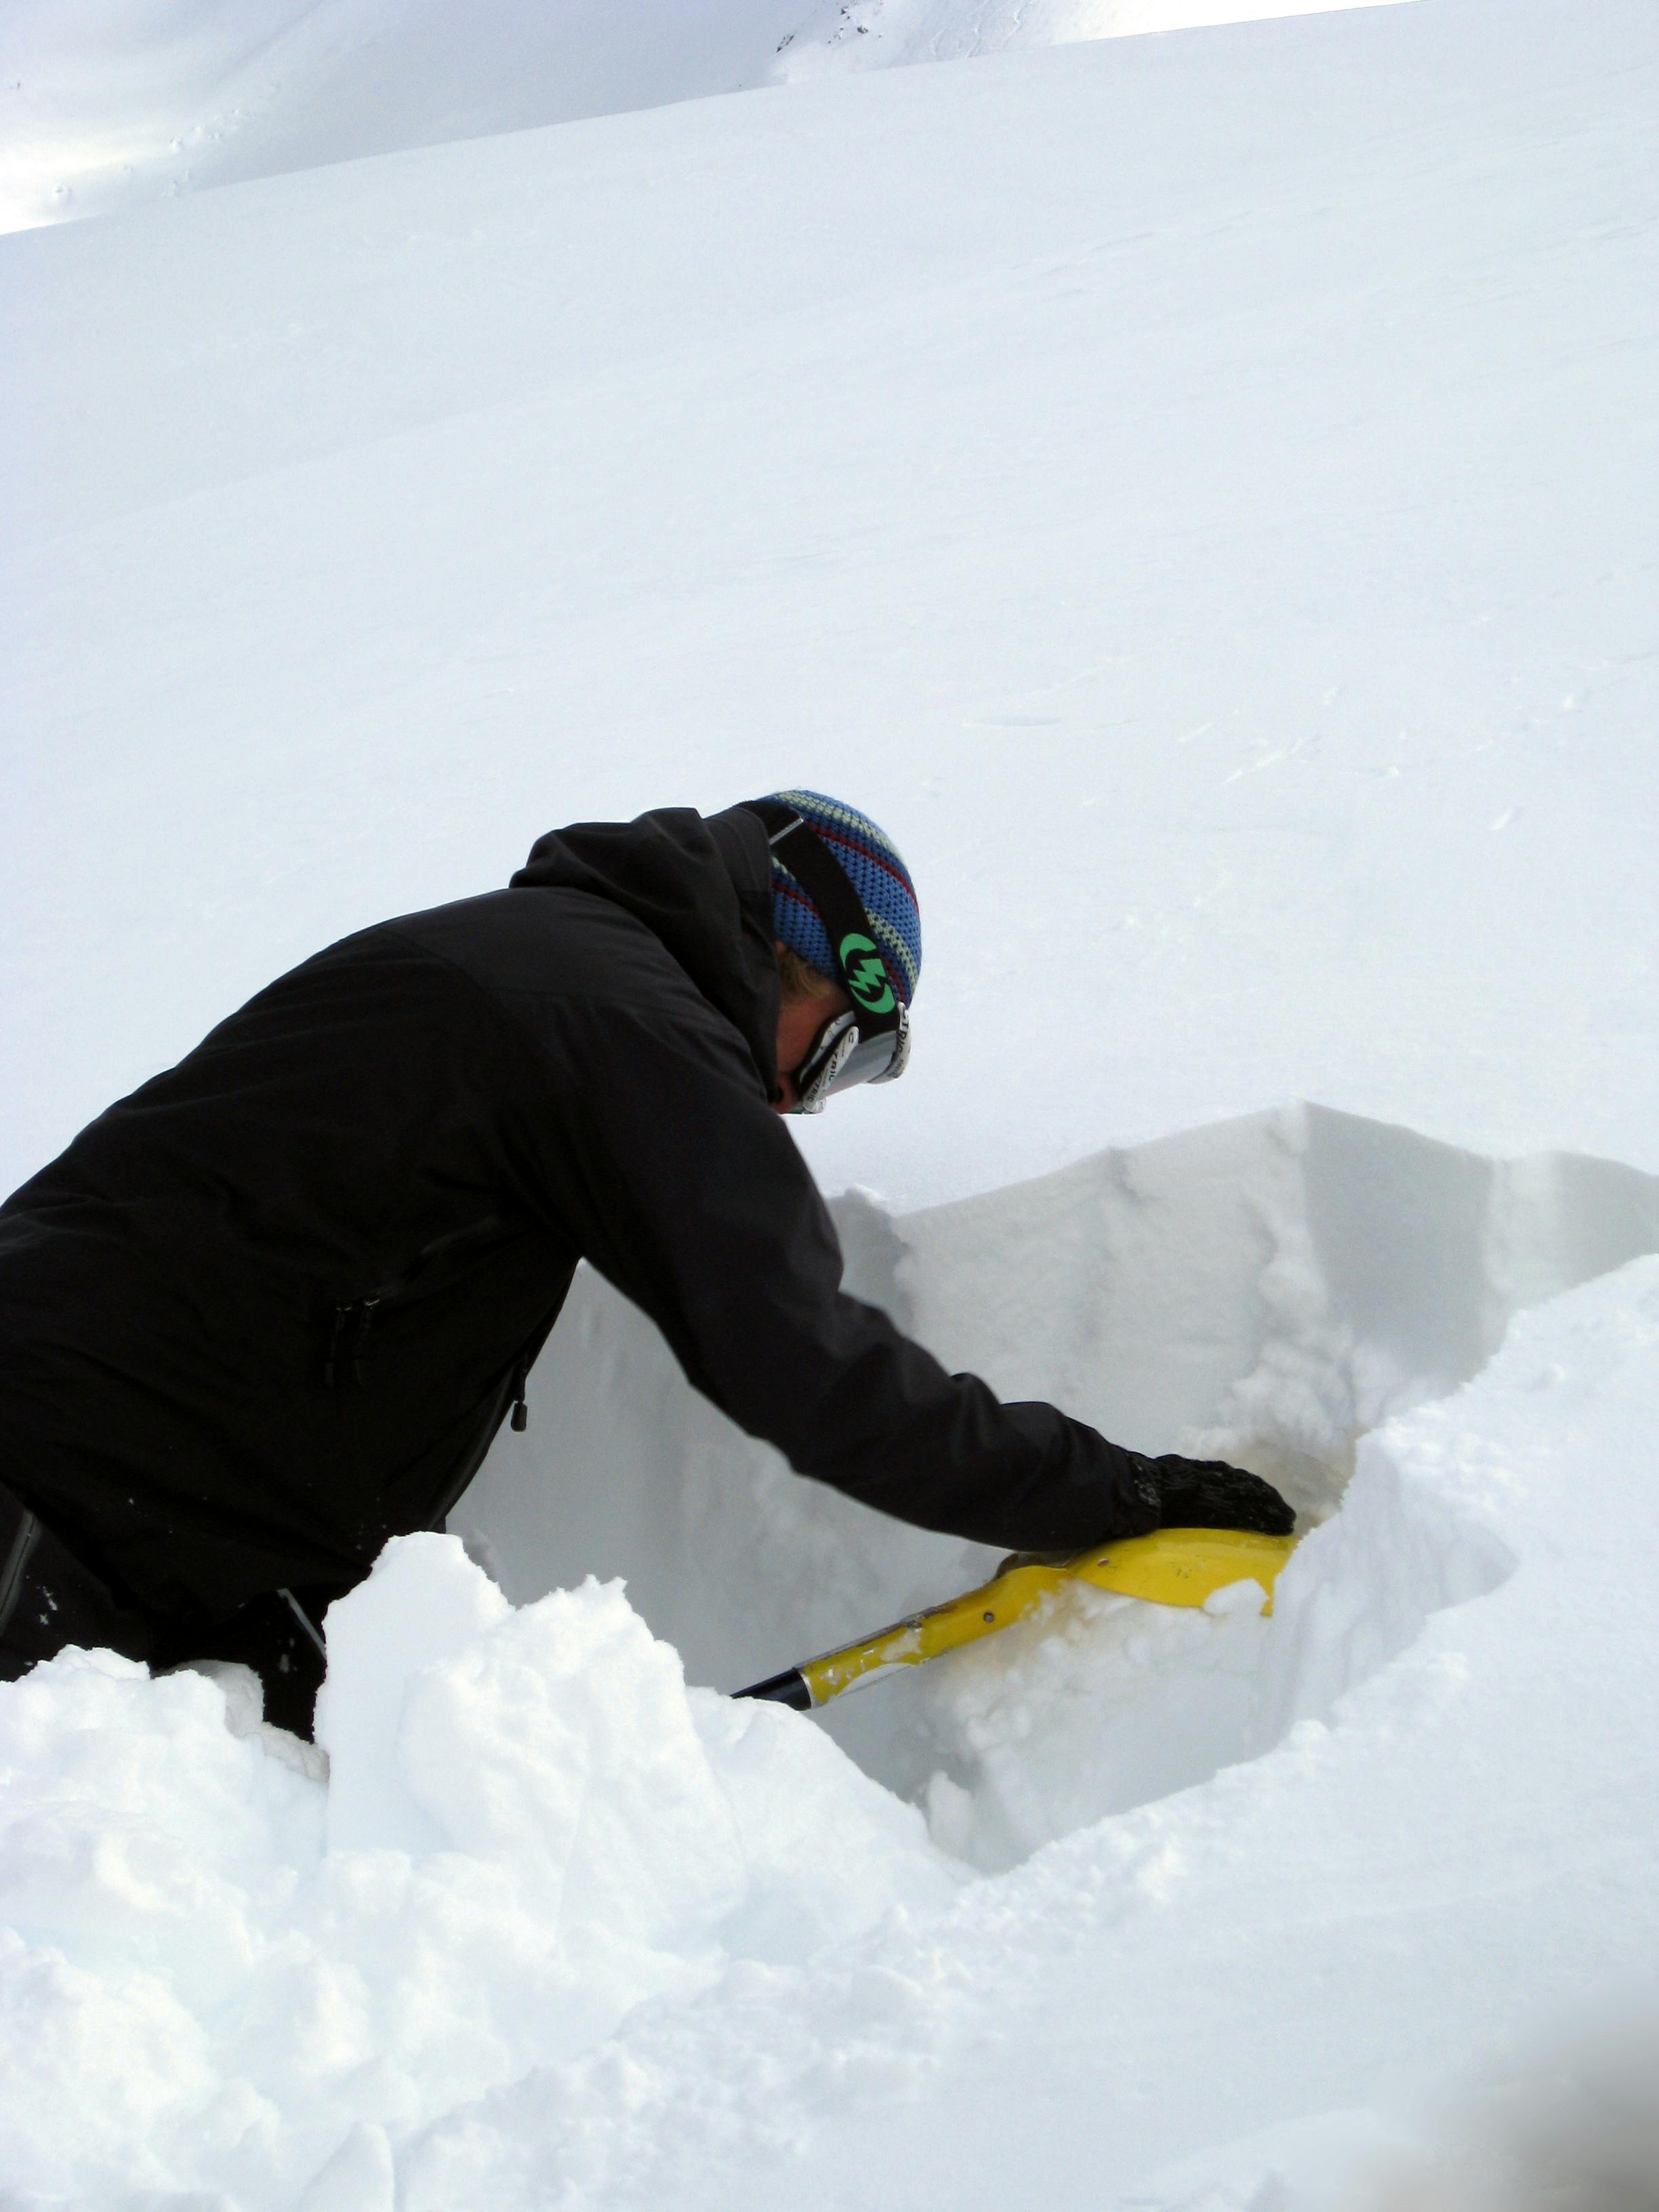 A man is using the head of a shovel to press down on some snow in a snow-pit for stability testing.